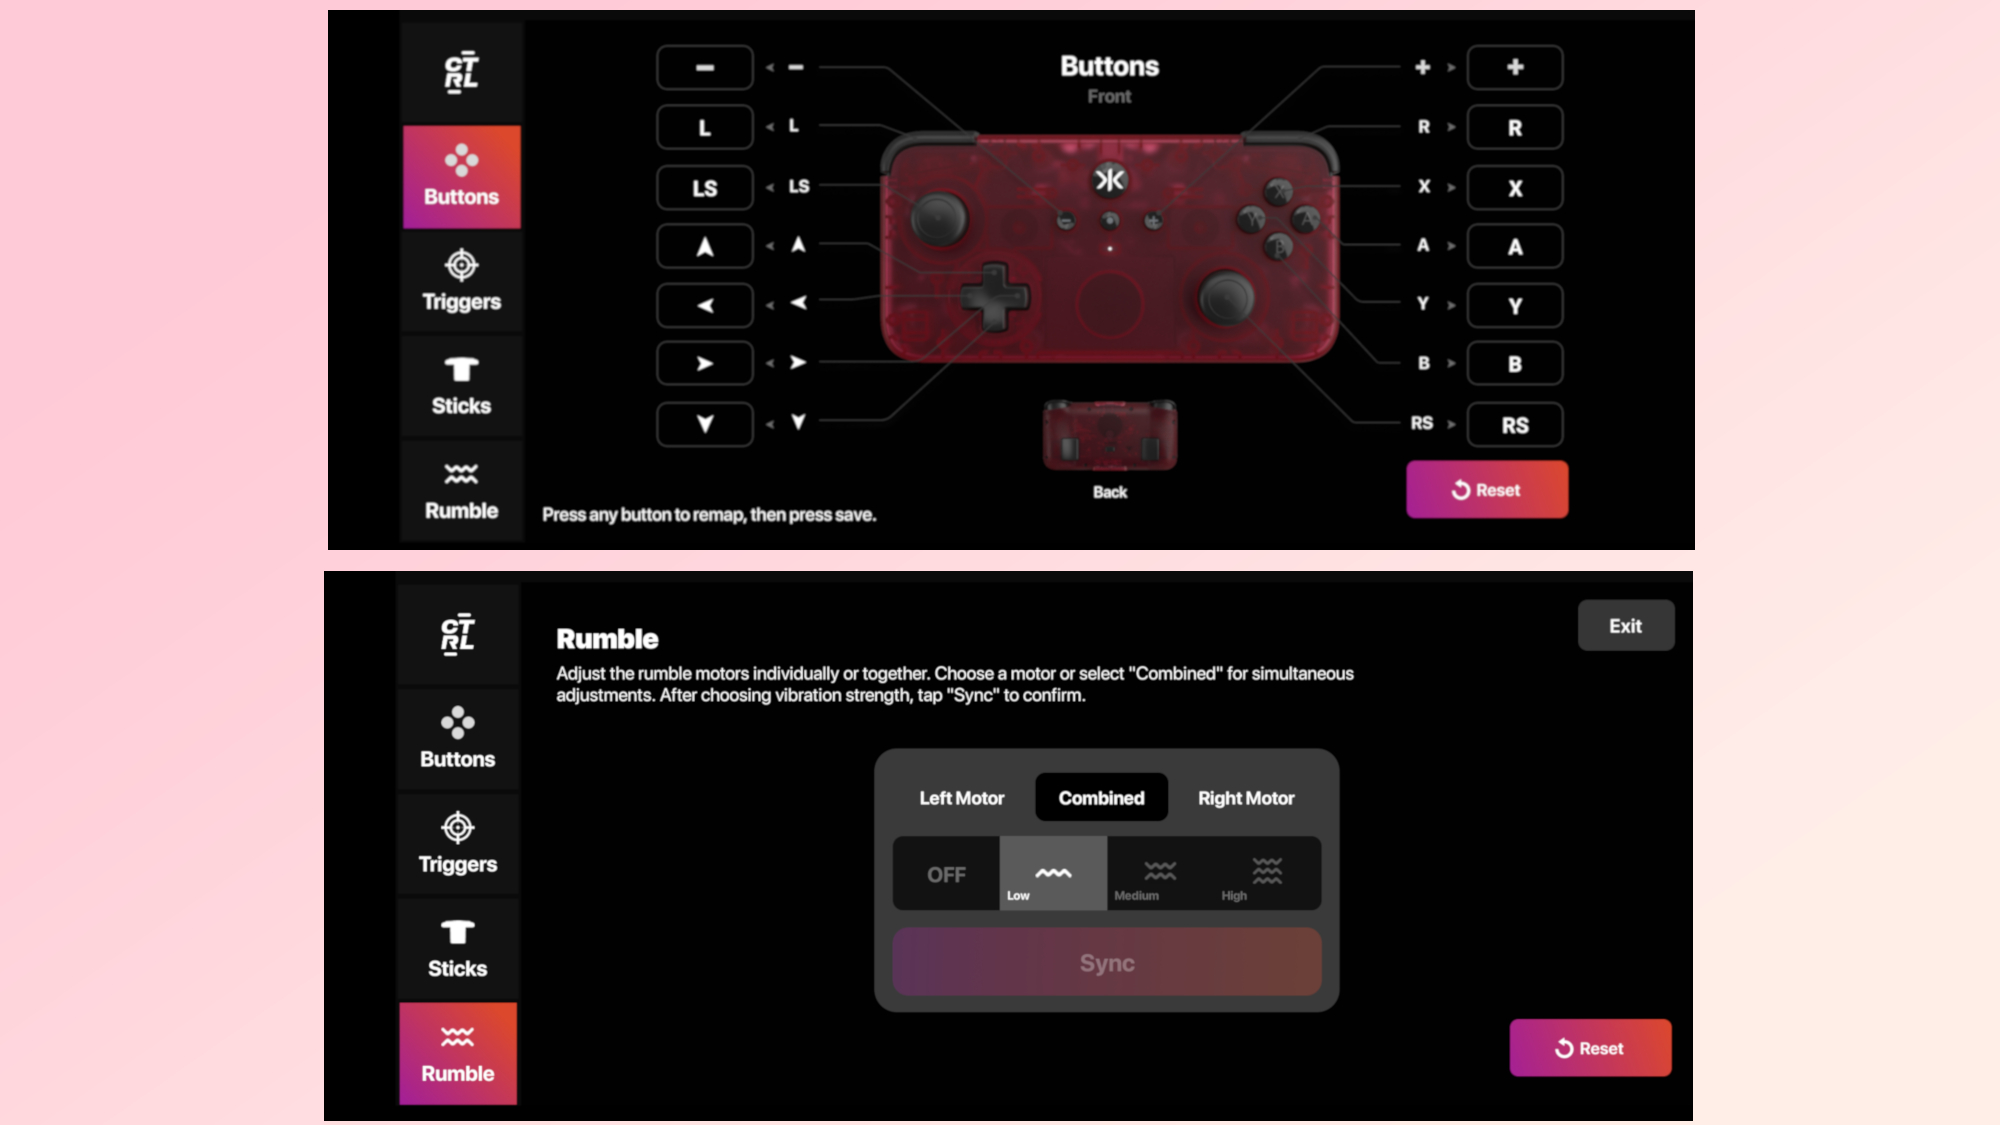 Screenshots showing how you customize the CRKD NEO S controller in CRKD's CTRL app